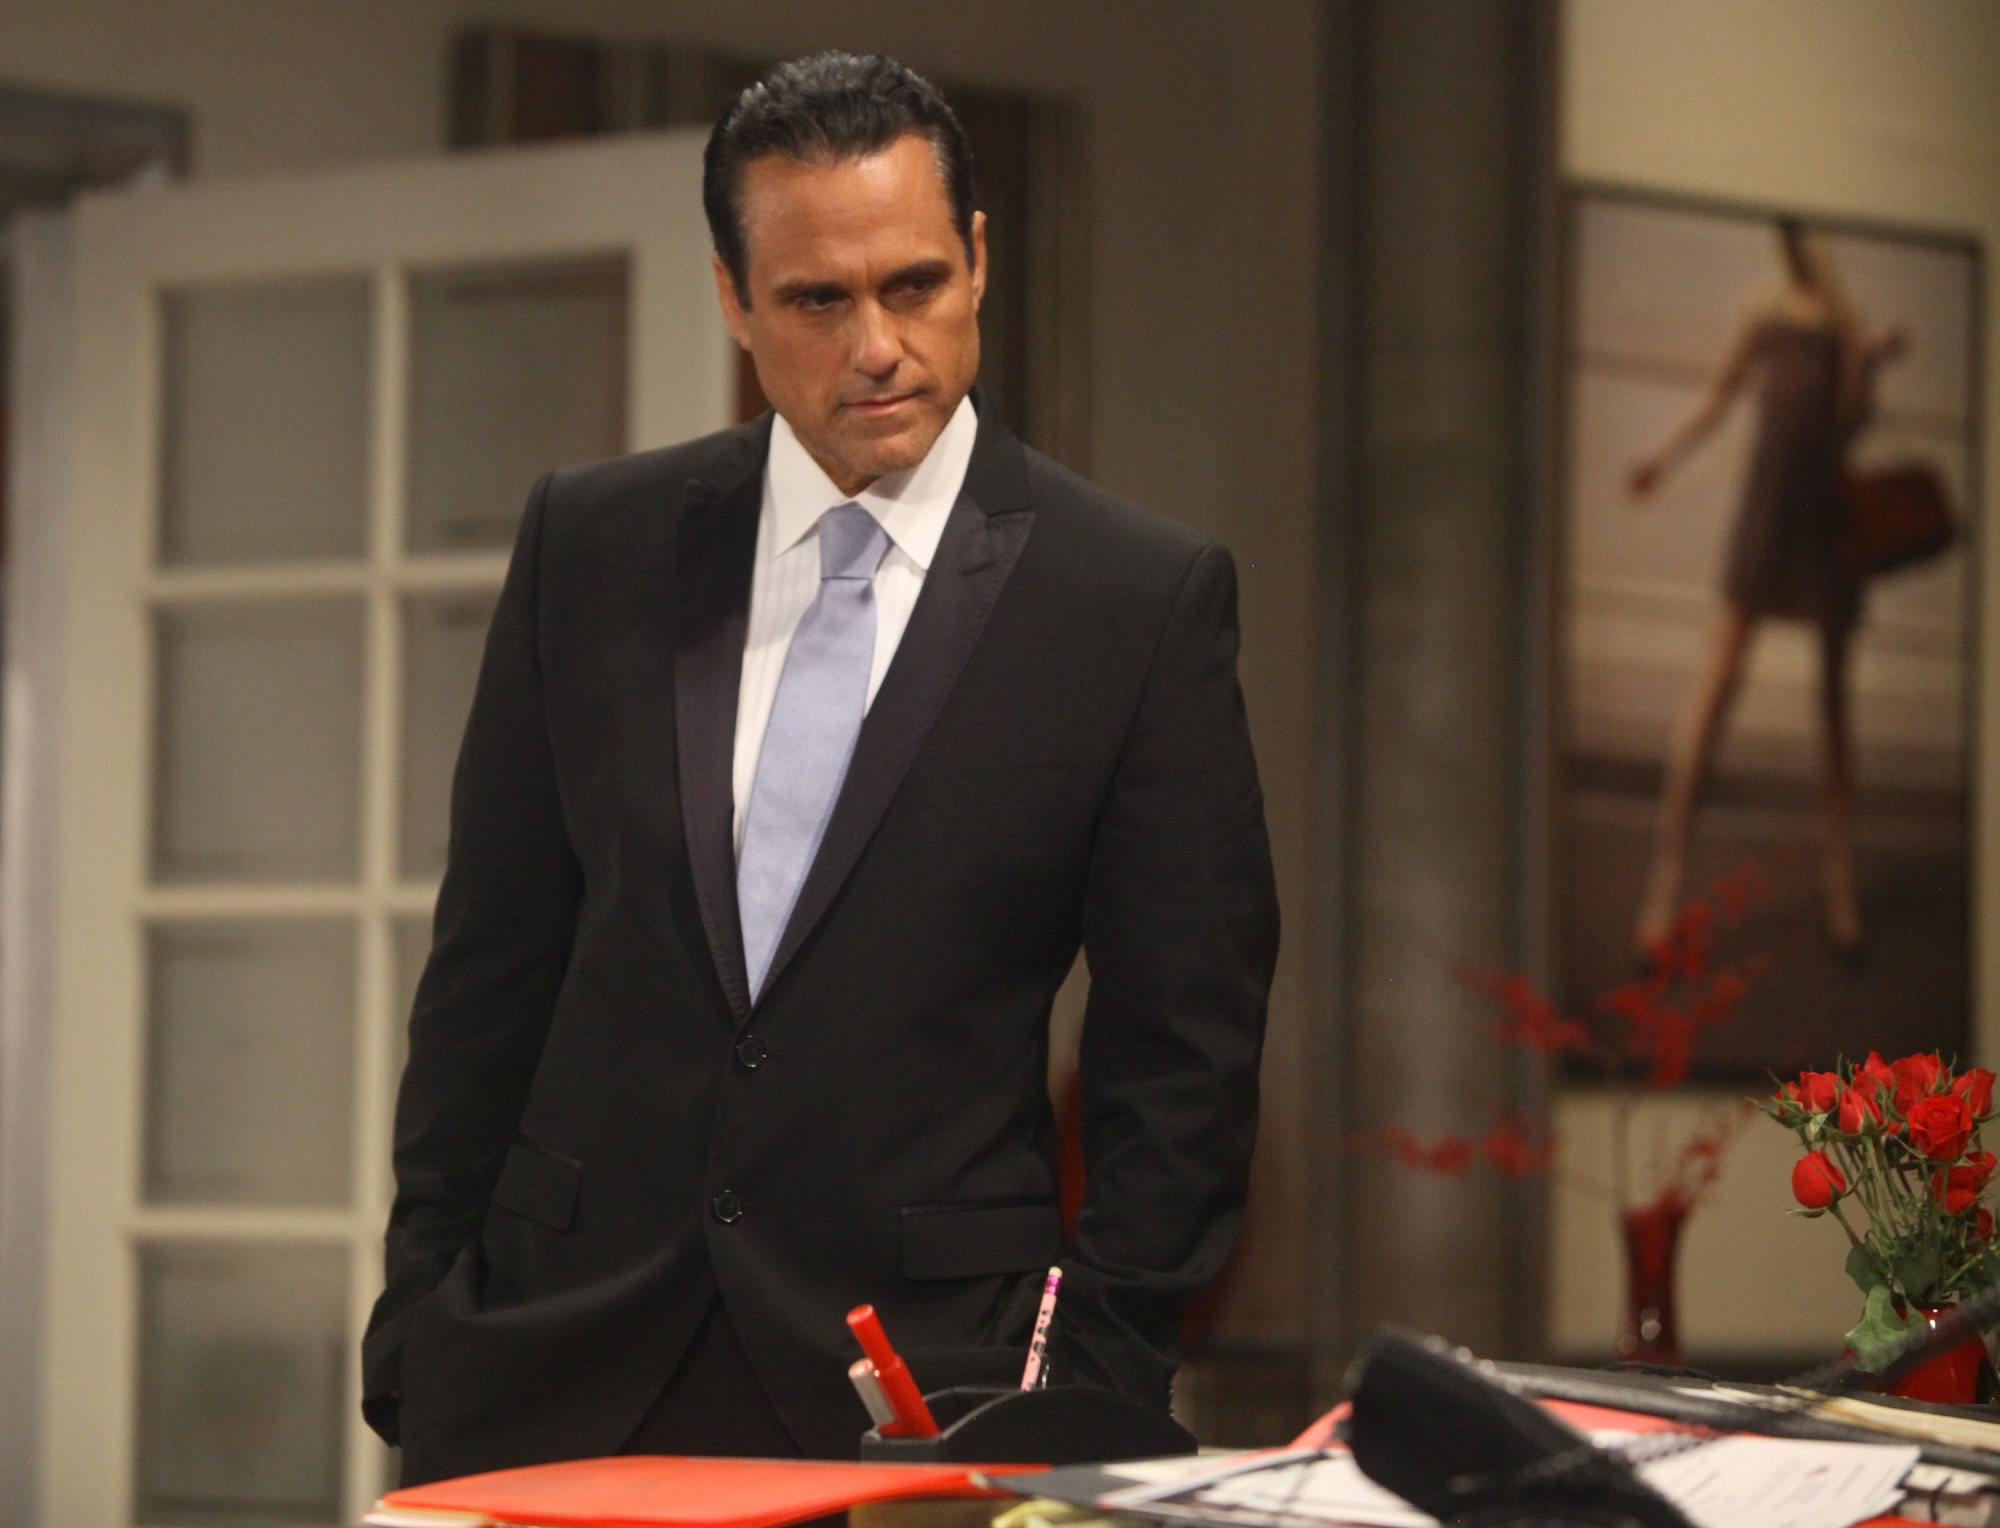 General Hospital spoilers focus on Sonny, played by Maurice Benard, pictured here